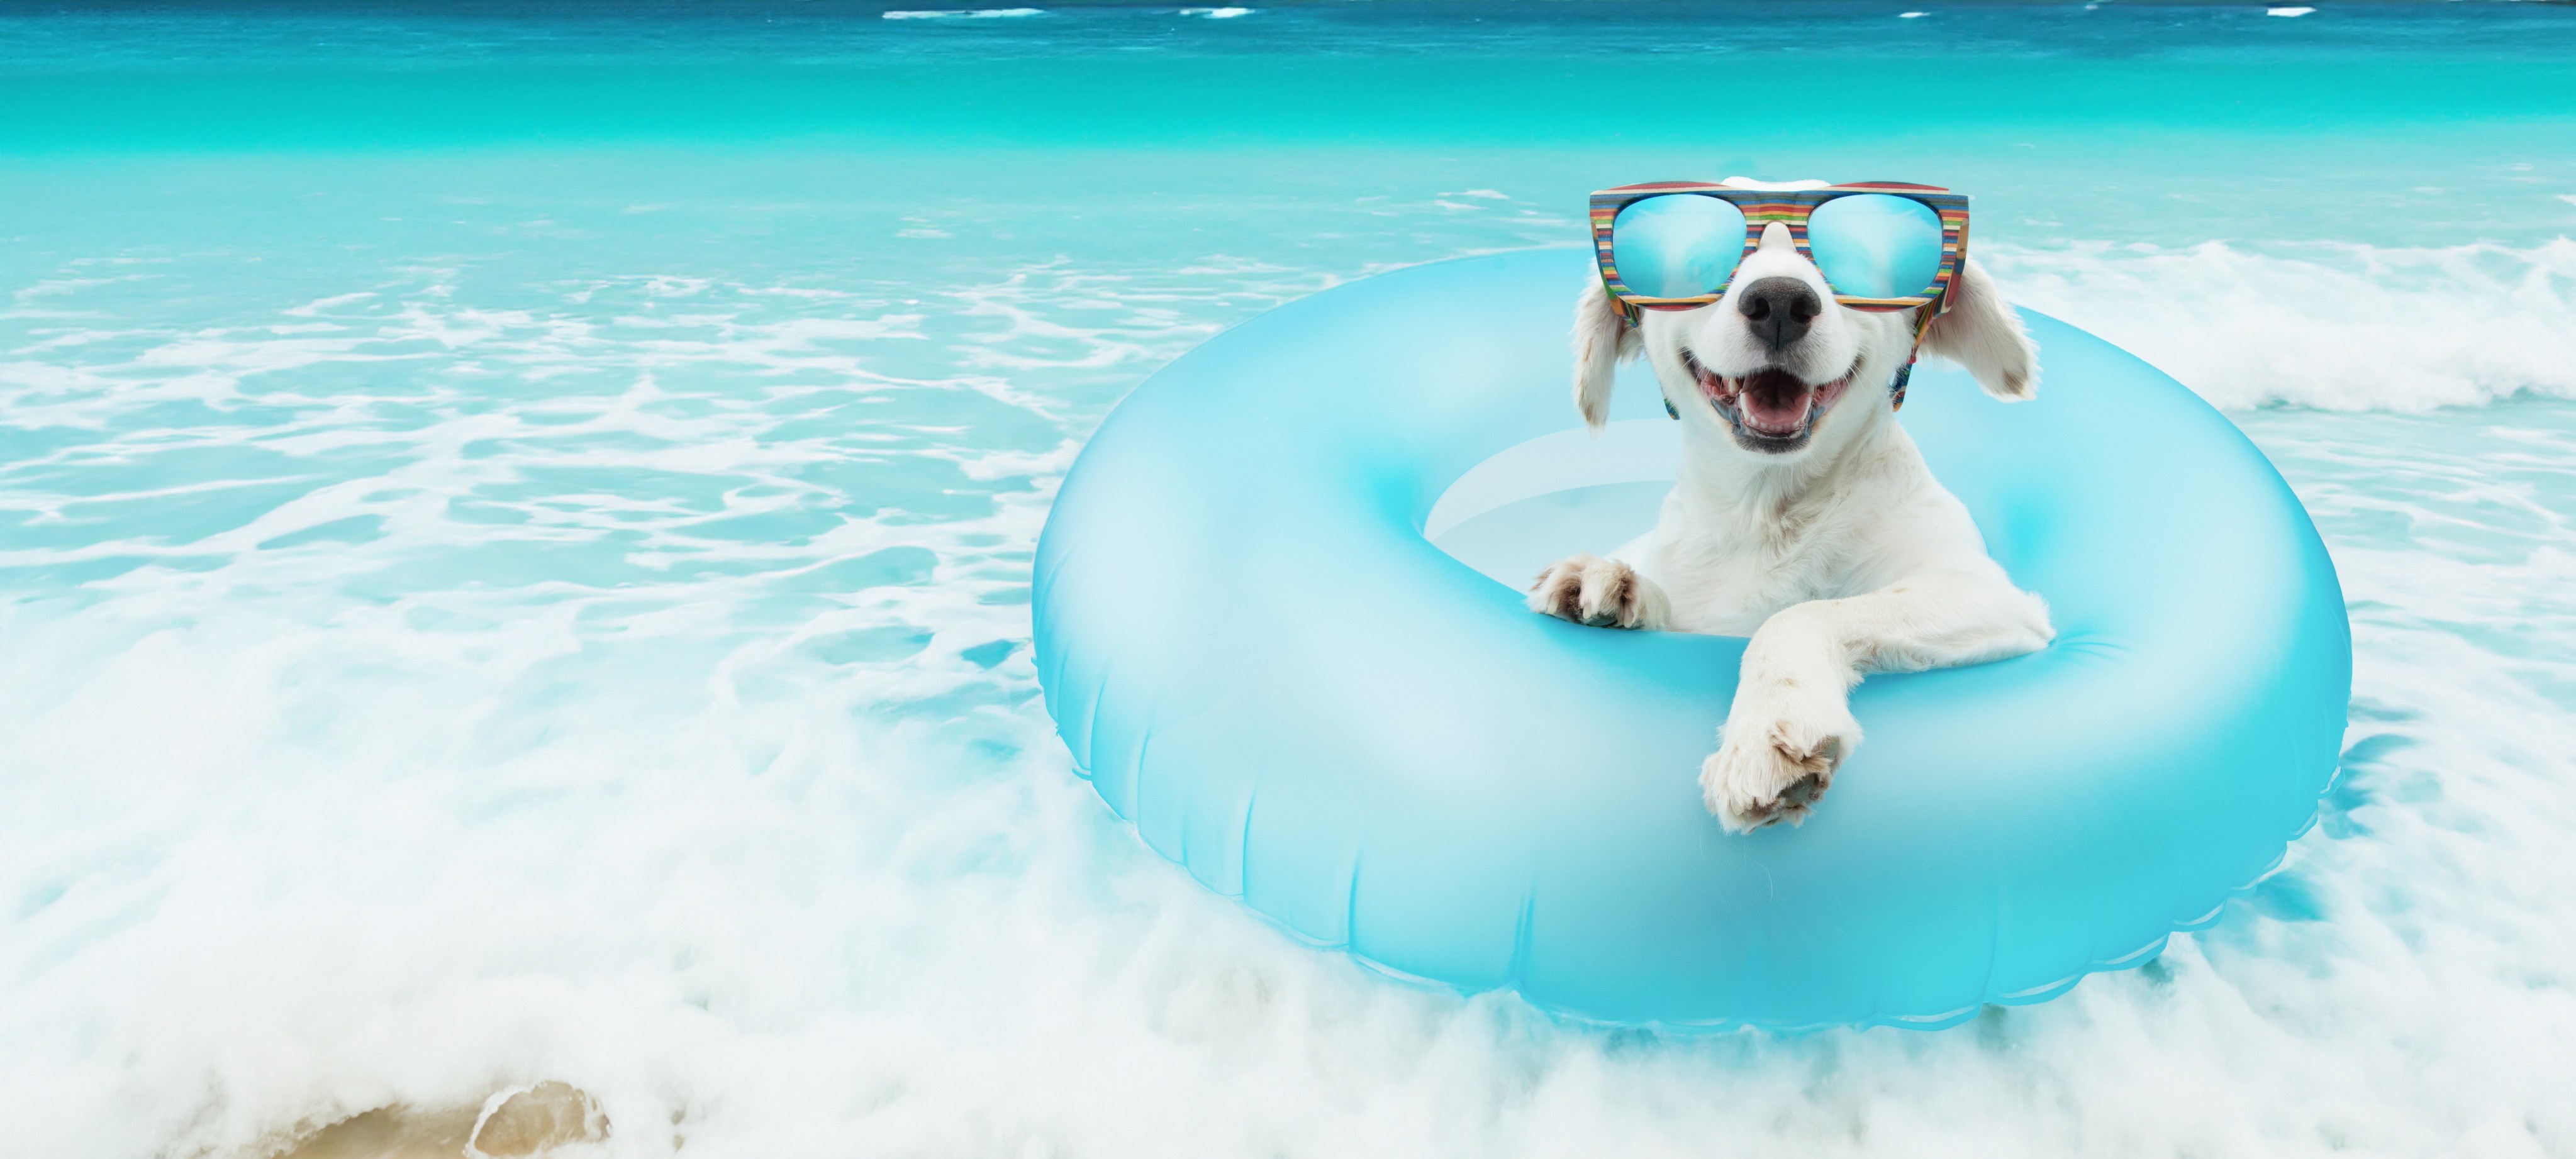 It’s summer, and Young Post is taking a break! We’ll see you again in September! Photo: Shutterstock